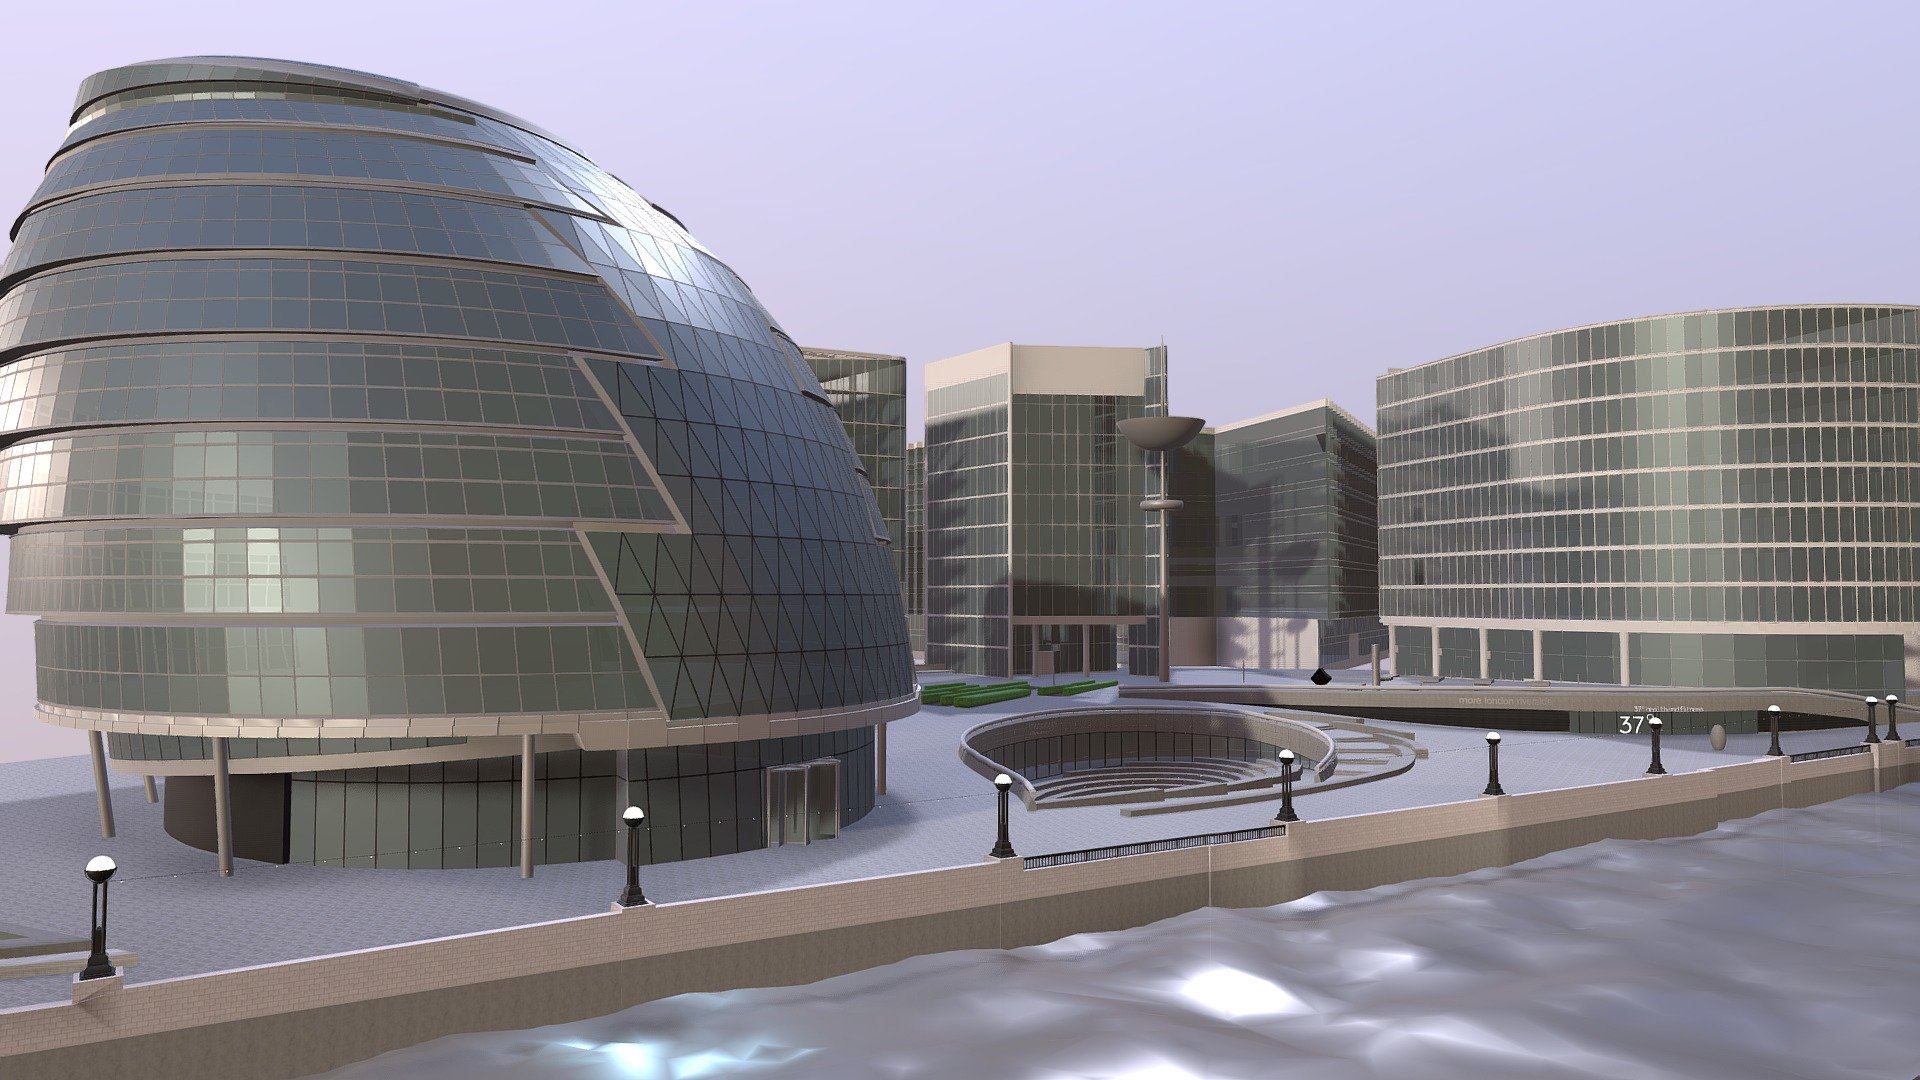 City hall is the headquarters of the Greater London Authority (GLA). It is modeled here with the surounding buildings and terrain. This project was created using 3D laser scanning of the area 3d model